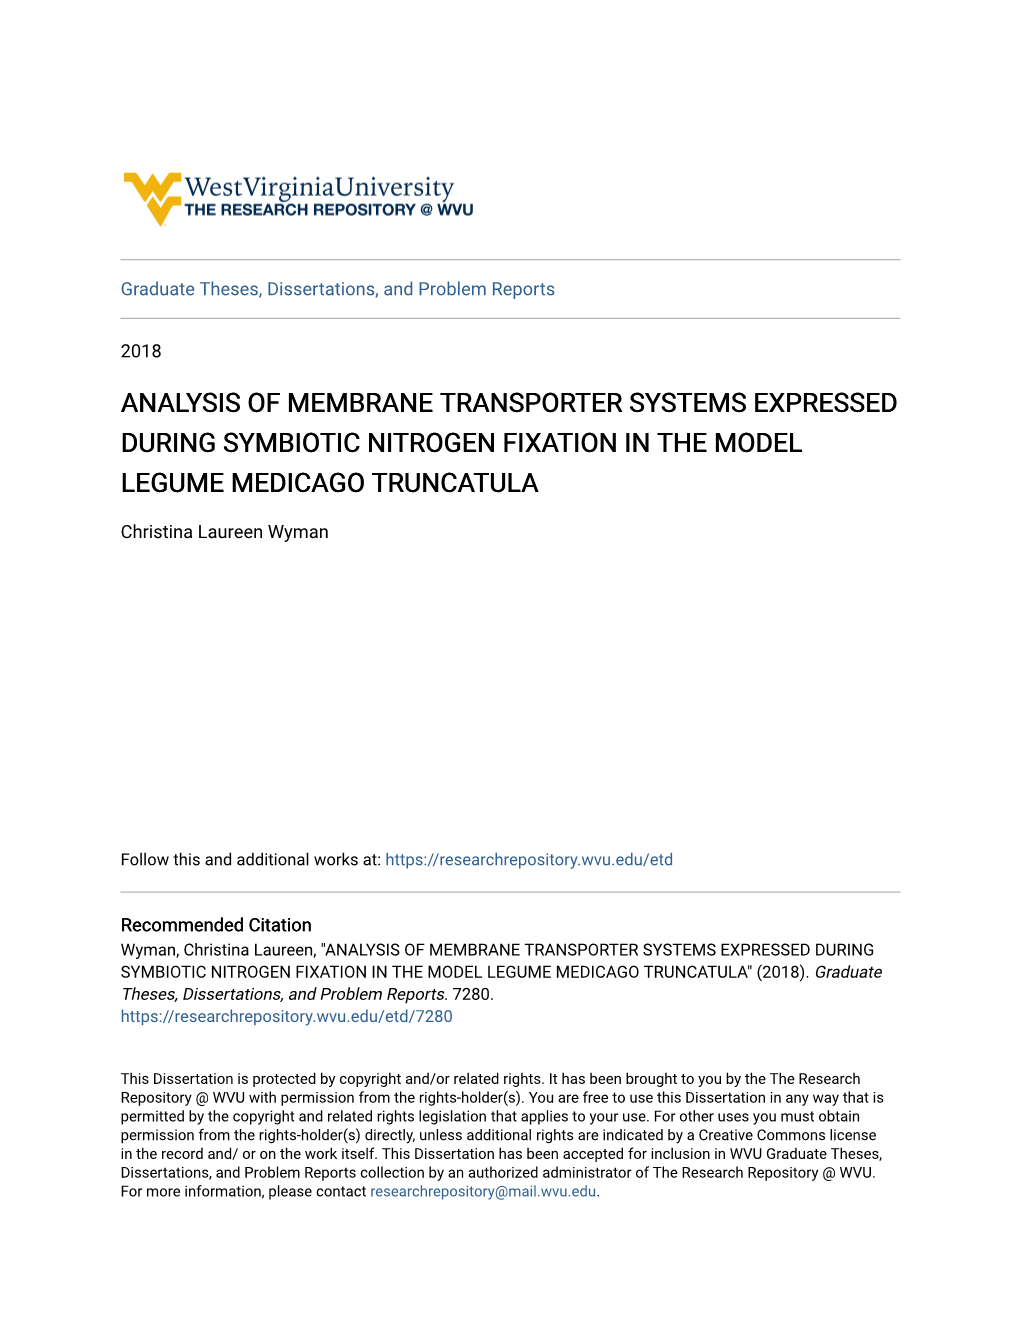 Analysis of Membrane Transporter Systems Expressed During Symbiotic Nitrogen Fixation in the Model Legume Medicago Truncatula